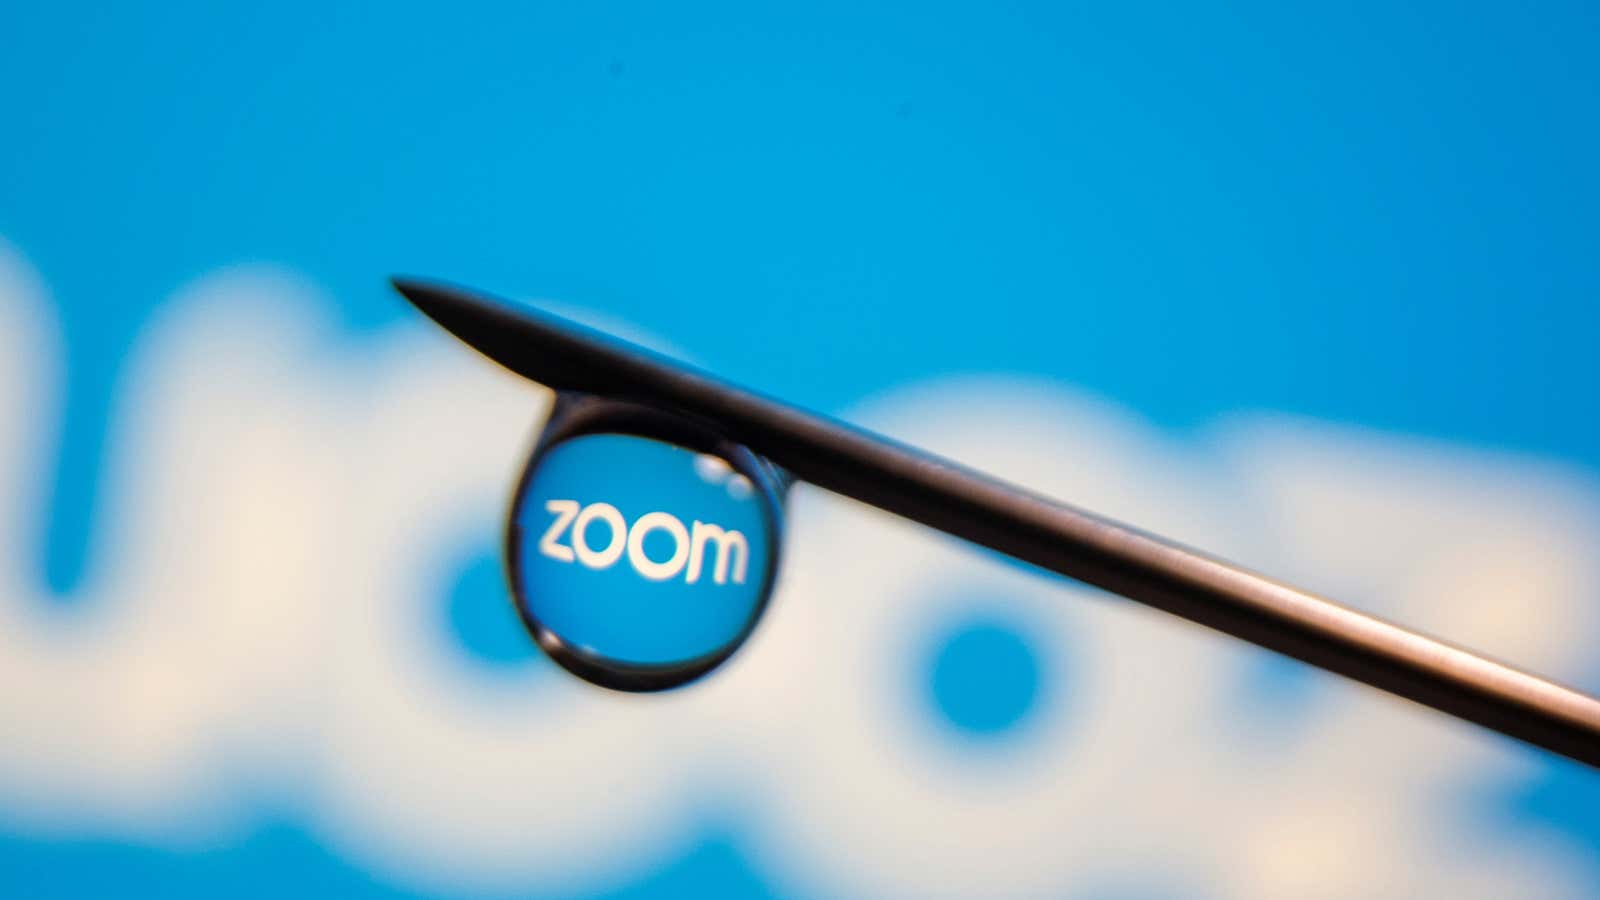 Zoom is starting a hybrid back-to-office approach